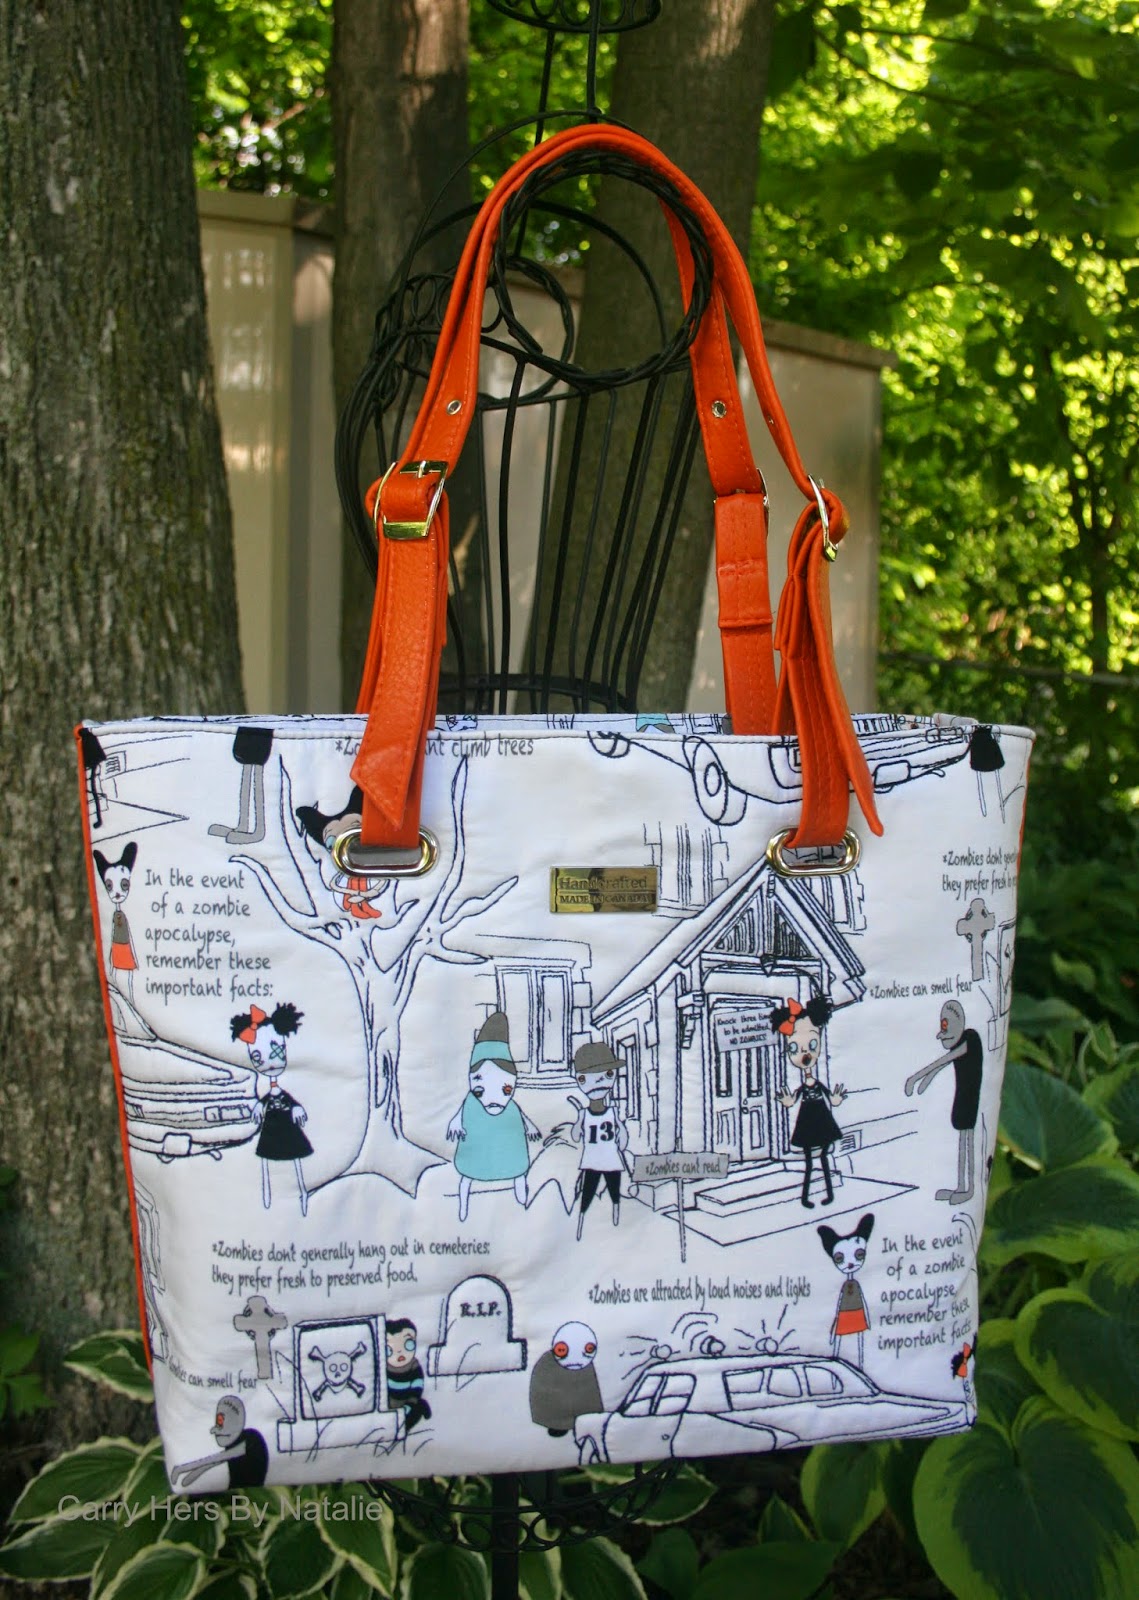 Carry Hers By Natalie: The Totes Ma Tote Pattern Testing